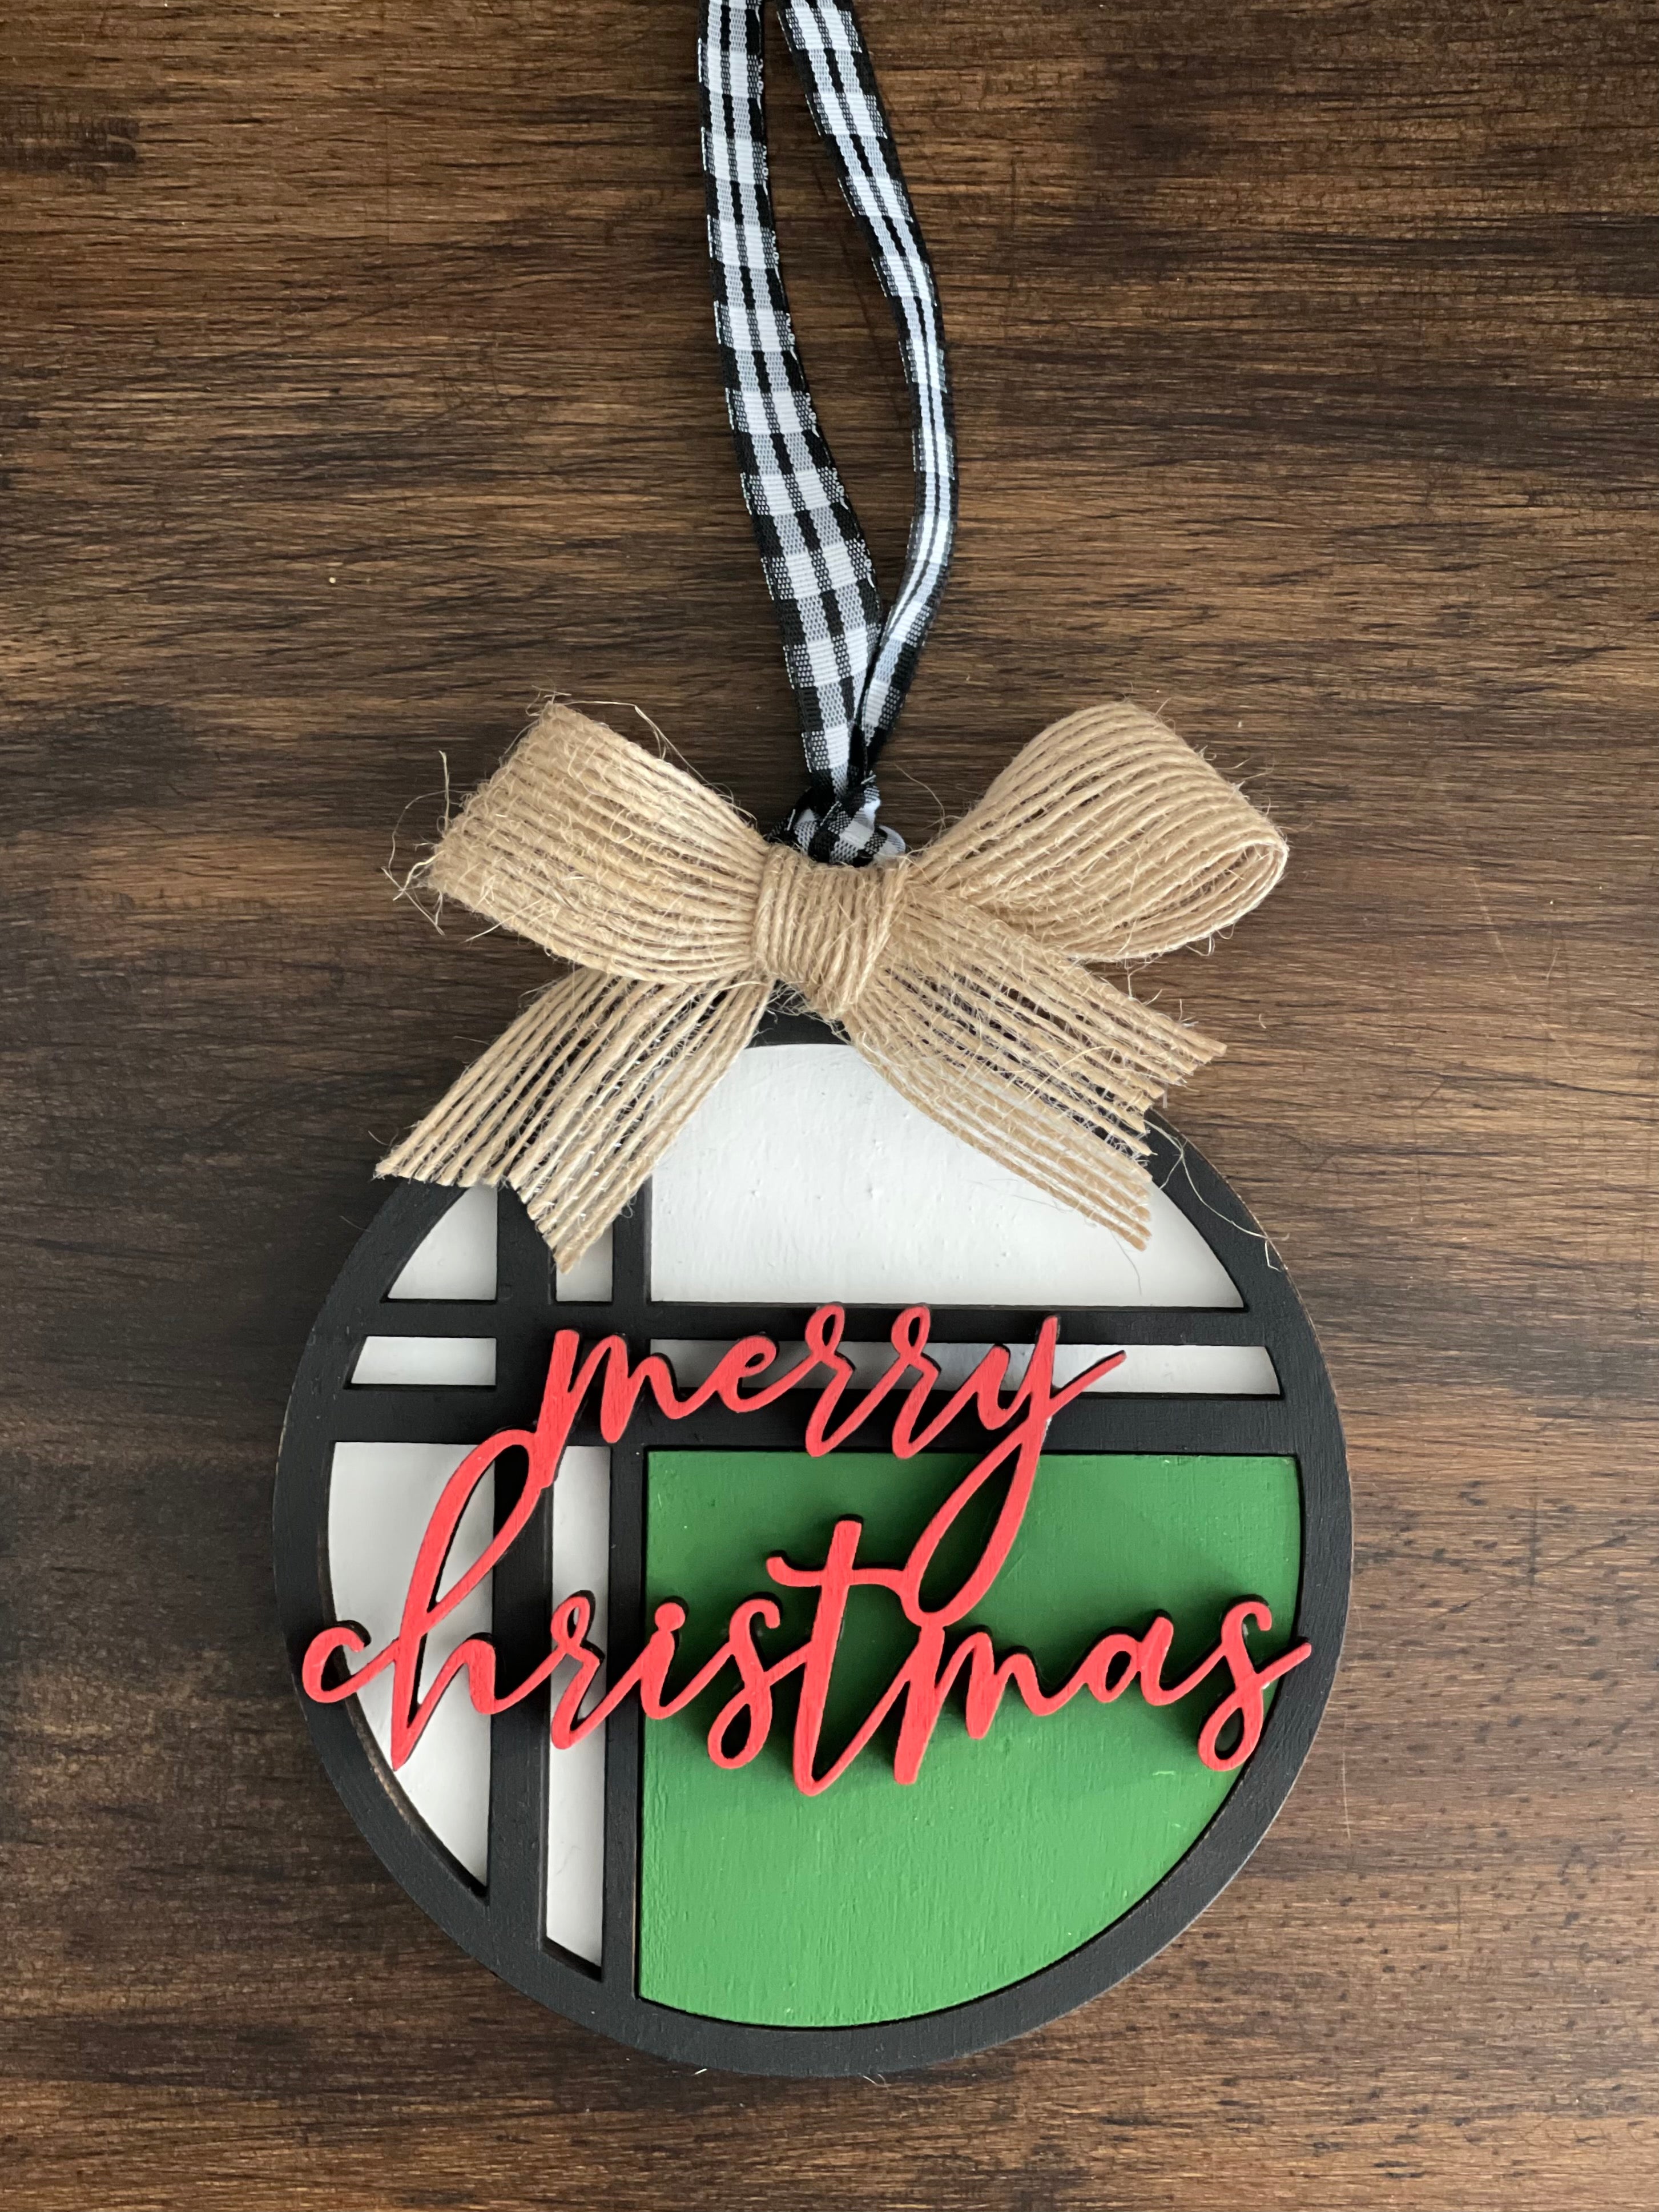 This is the red, green, white and black Merry Christmas ornament with a twine bow.